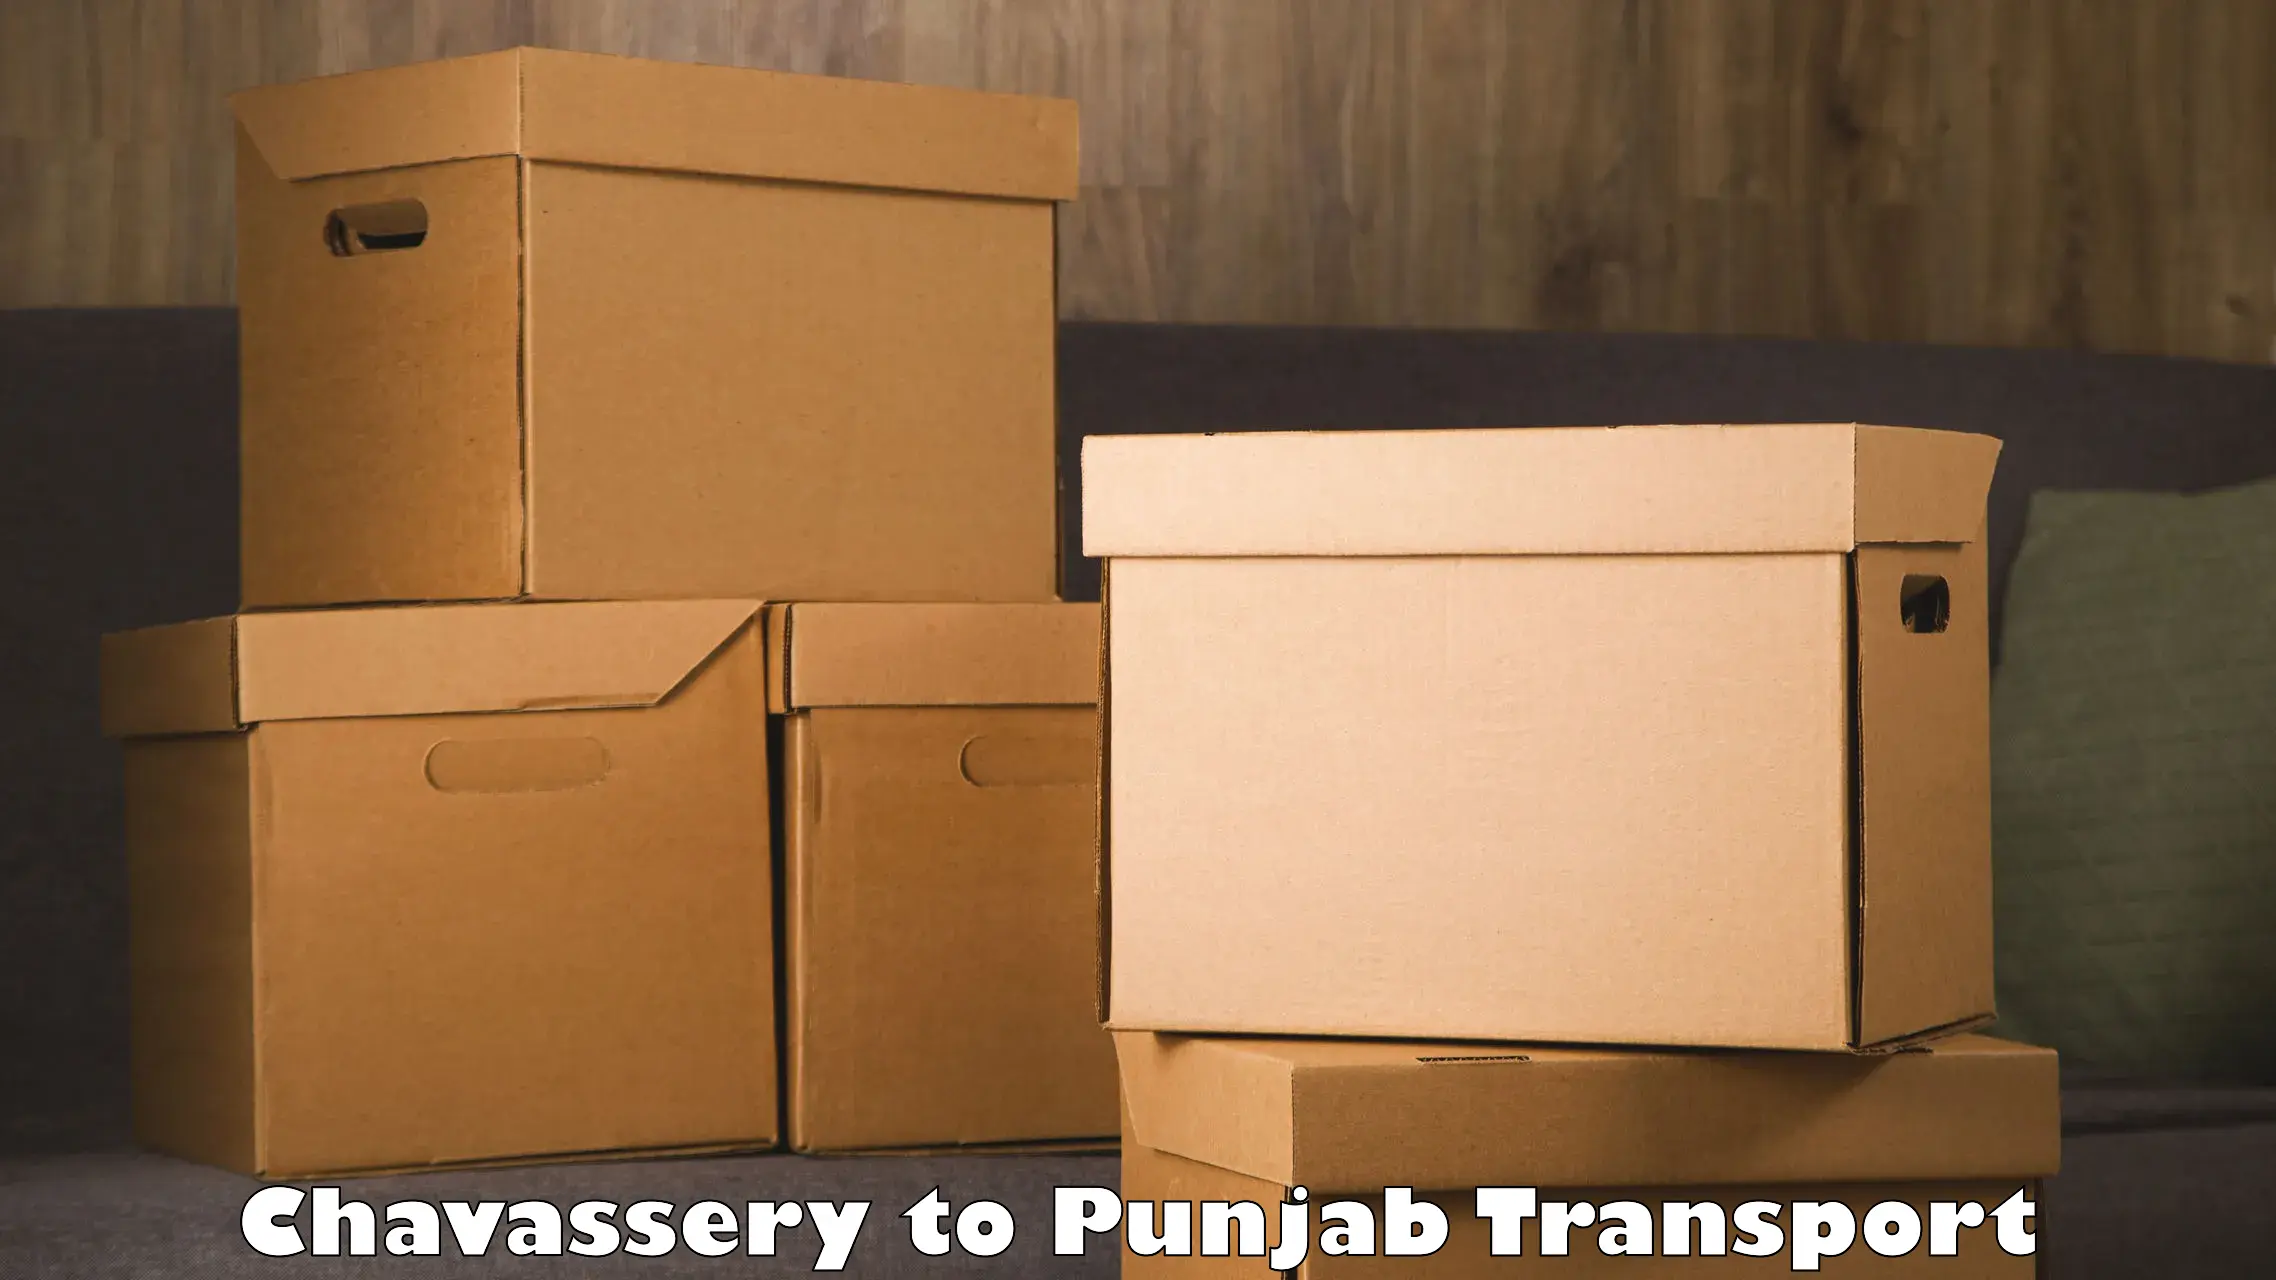 Air cargo transport services Chavassery to Punjab